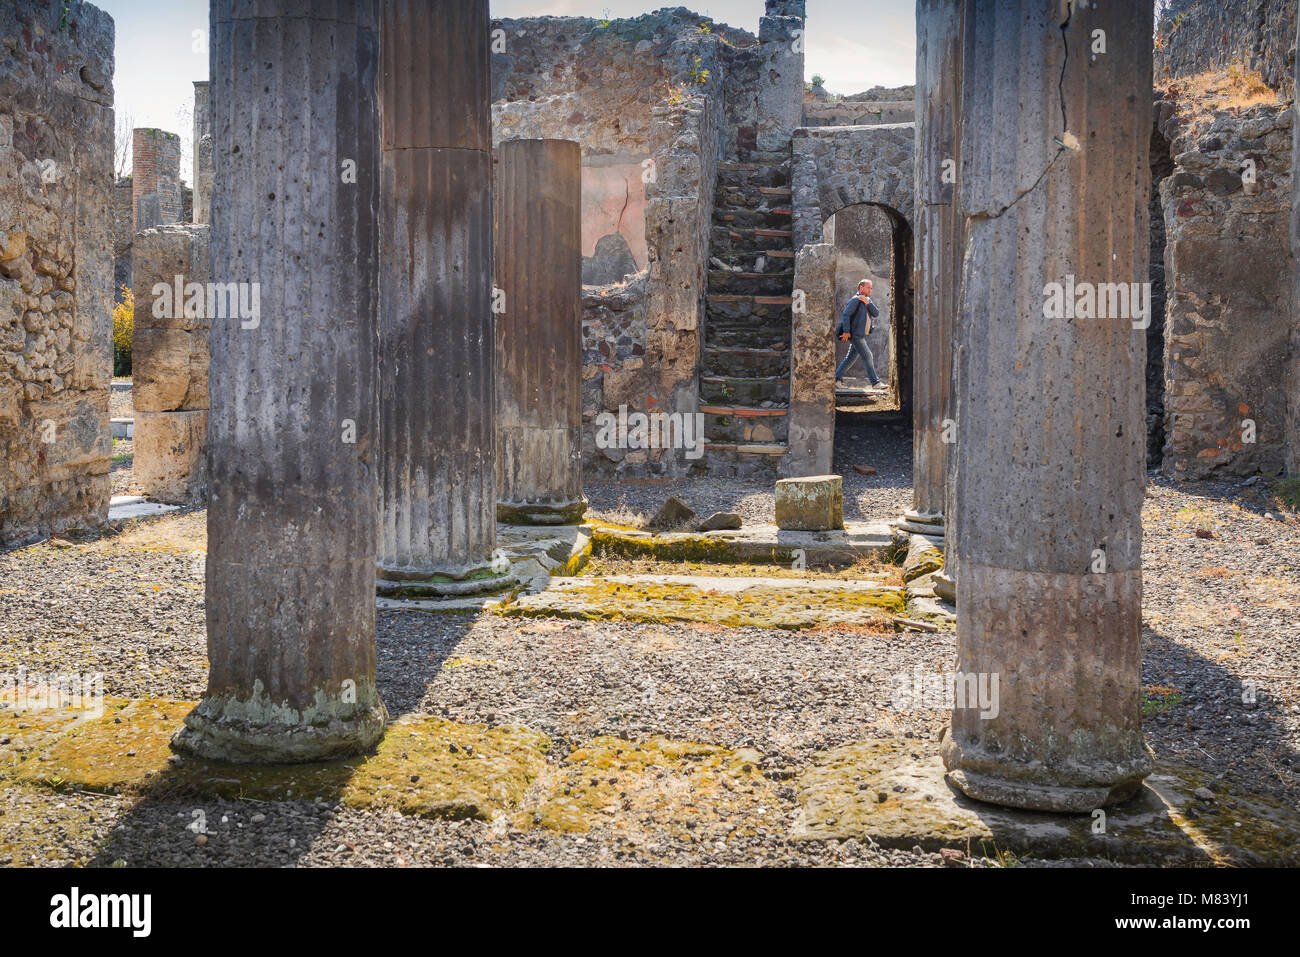 Pompeii ruins, view of the interior of an ancient Roman villa with a tourist walking by in the street outside the building, Bay of Naples, Italy. Stock Photo